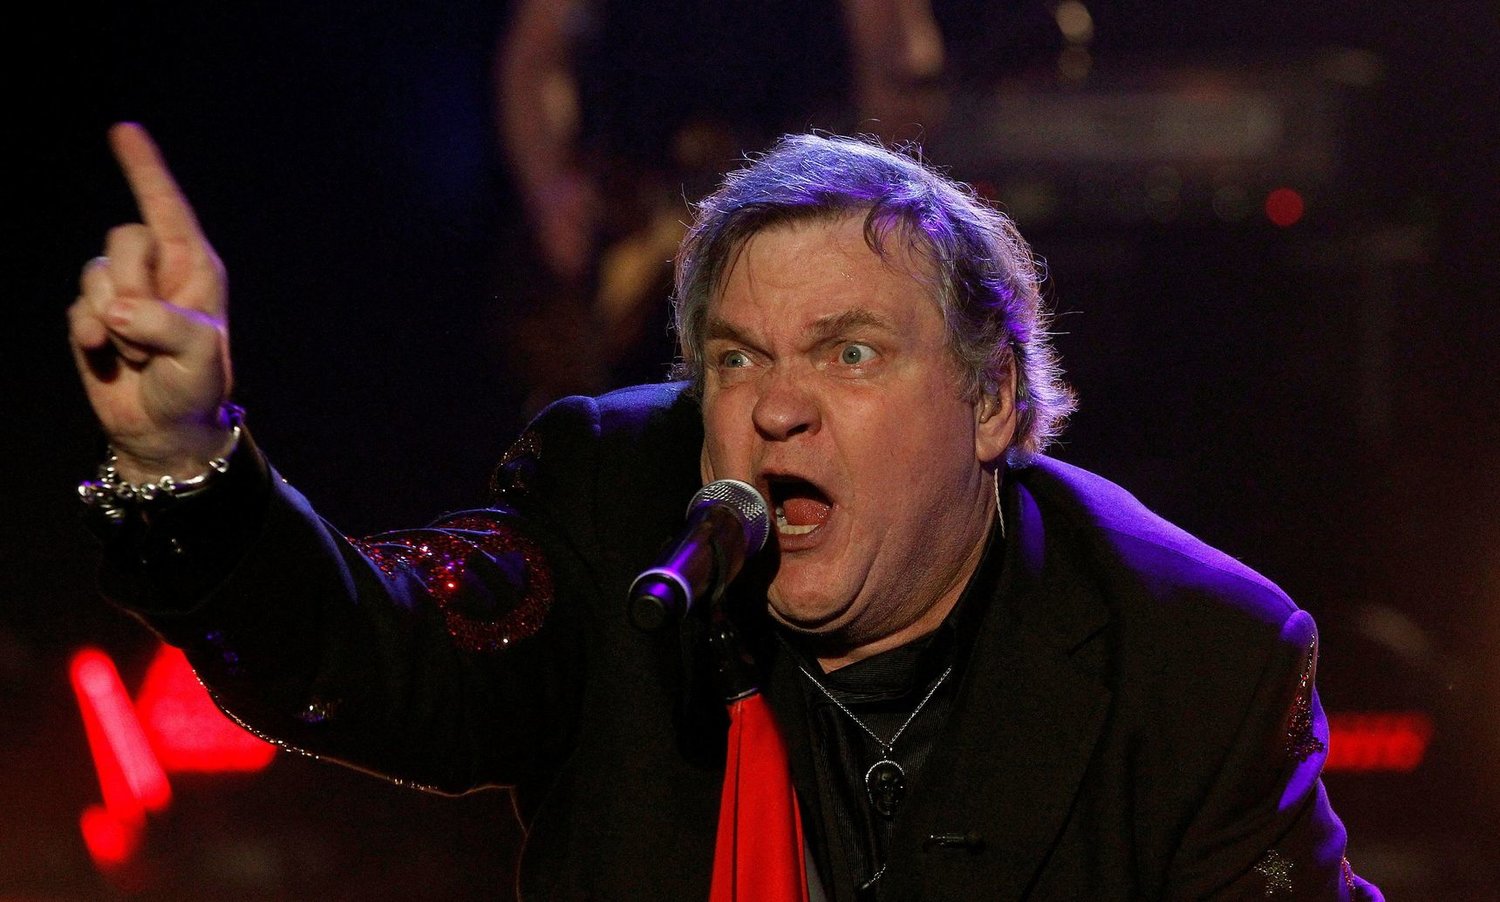 Meat Loaf, whose 1977 album “Bat Out of Hell” is one of the bestselling of all time, died Jan. 20 at 74 years old.